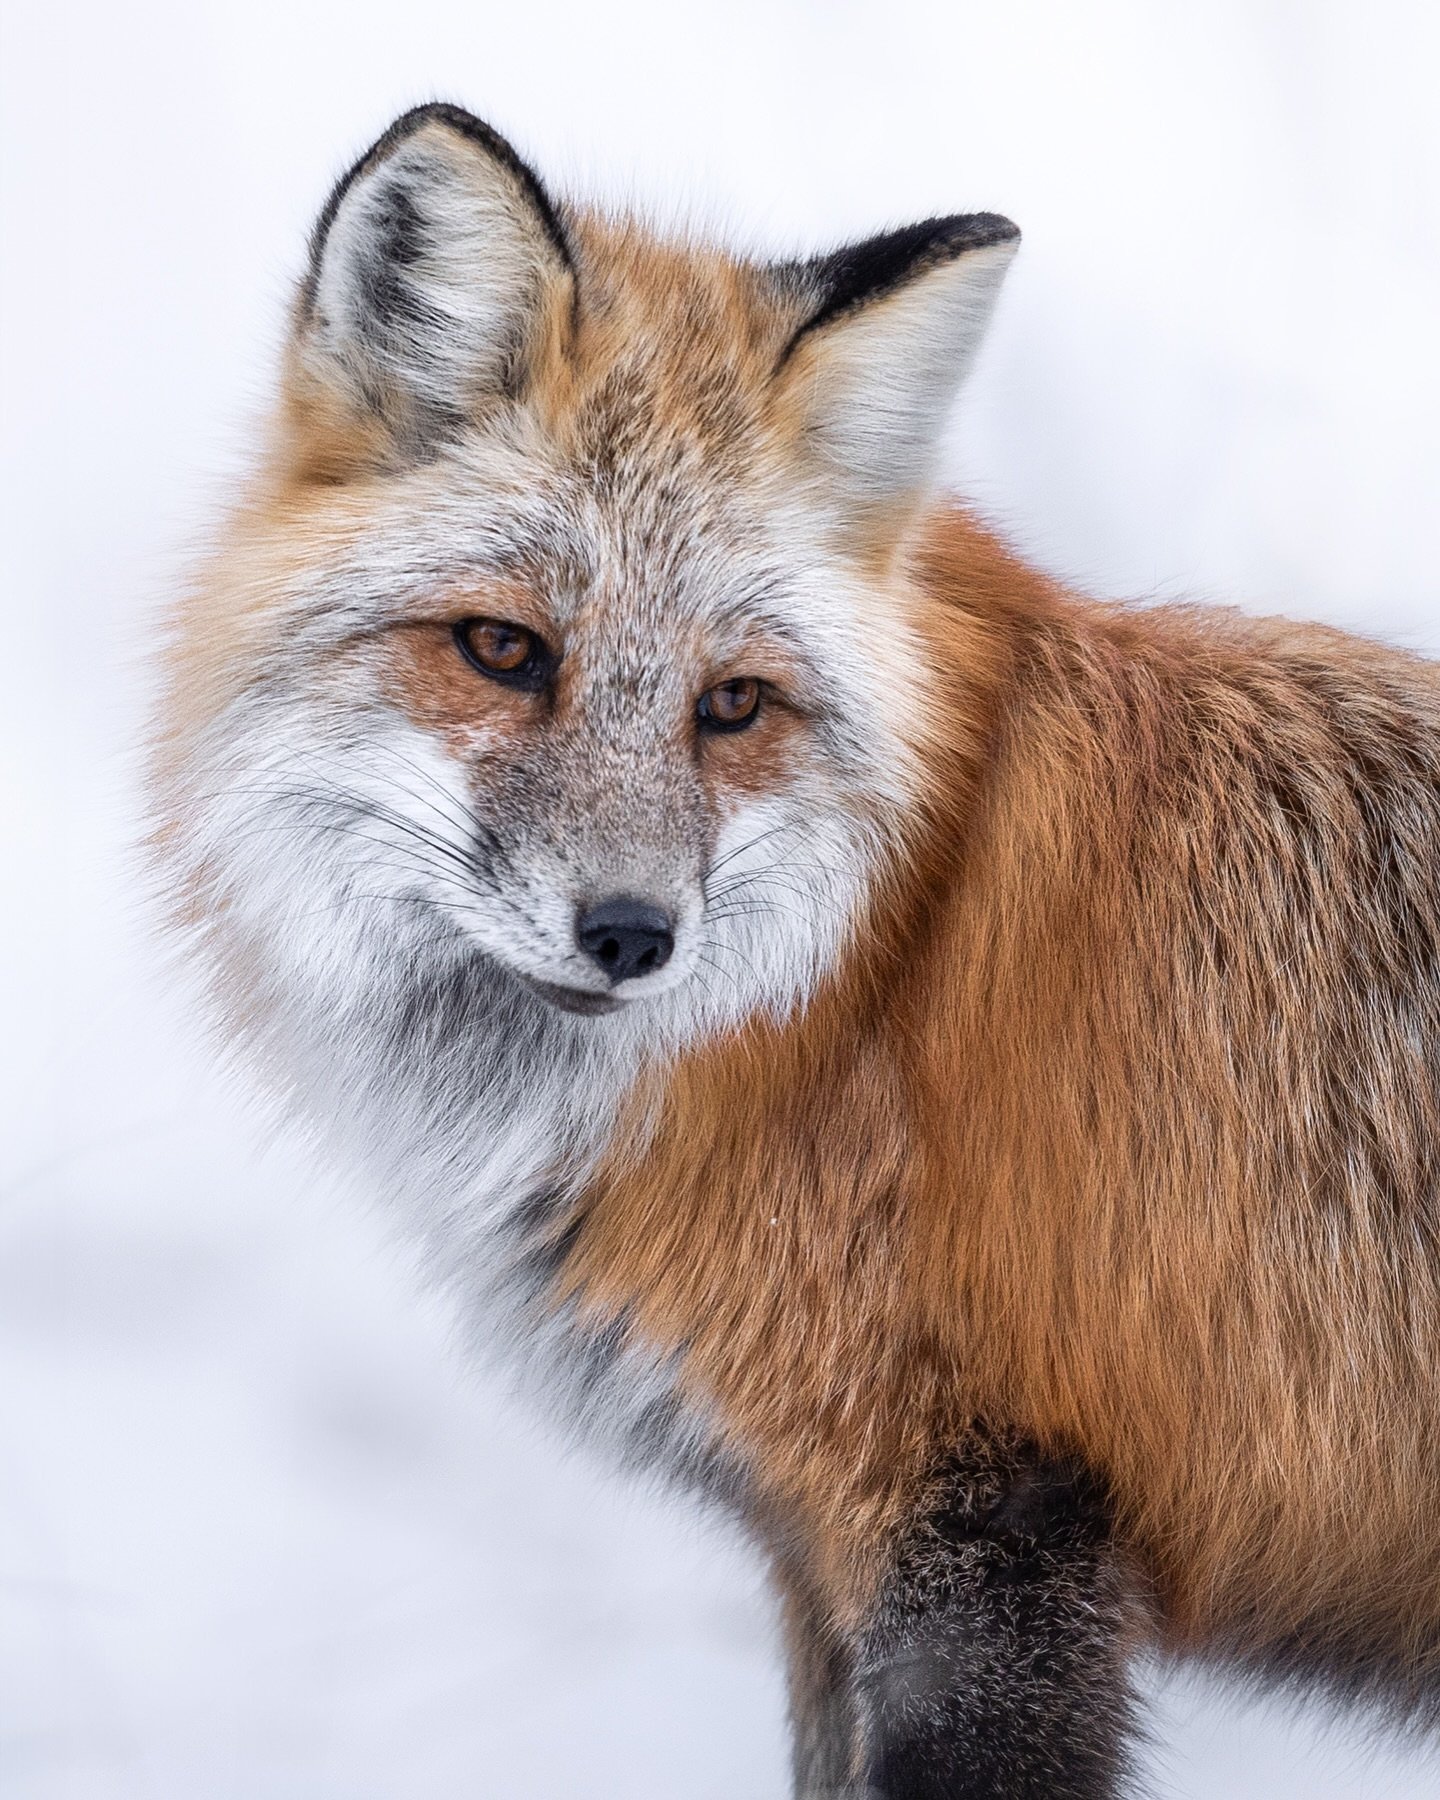 vivid color amid a colorless landscape 

This fox was my favorite subject all winter. I photographed it early in the winter, and for only about five to ten minutes as it hunted through a snowy meadow. With a full winter coat the fox was absolutely be